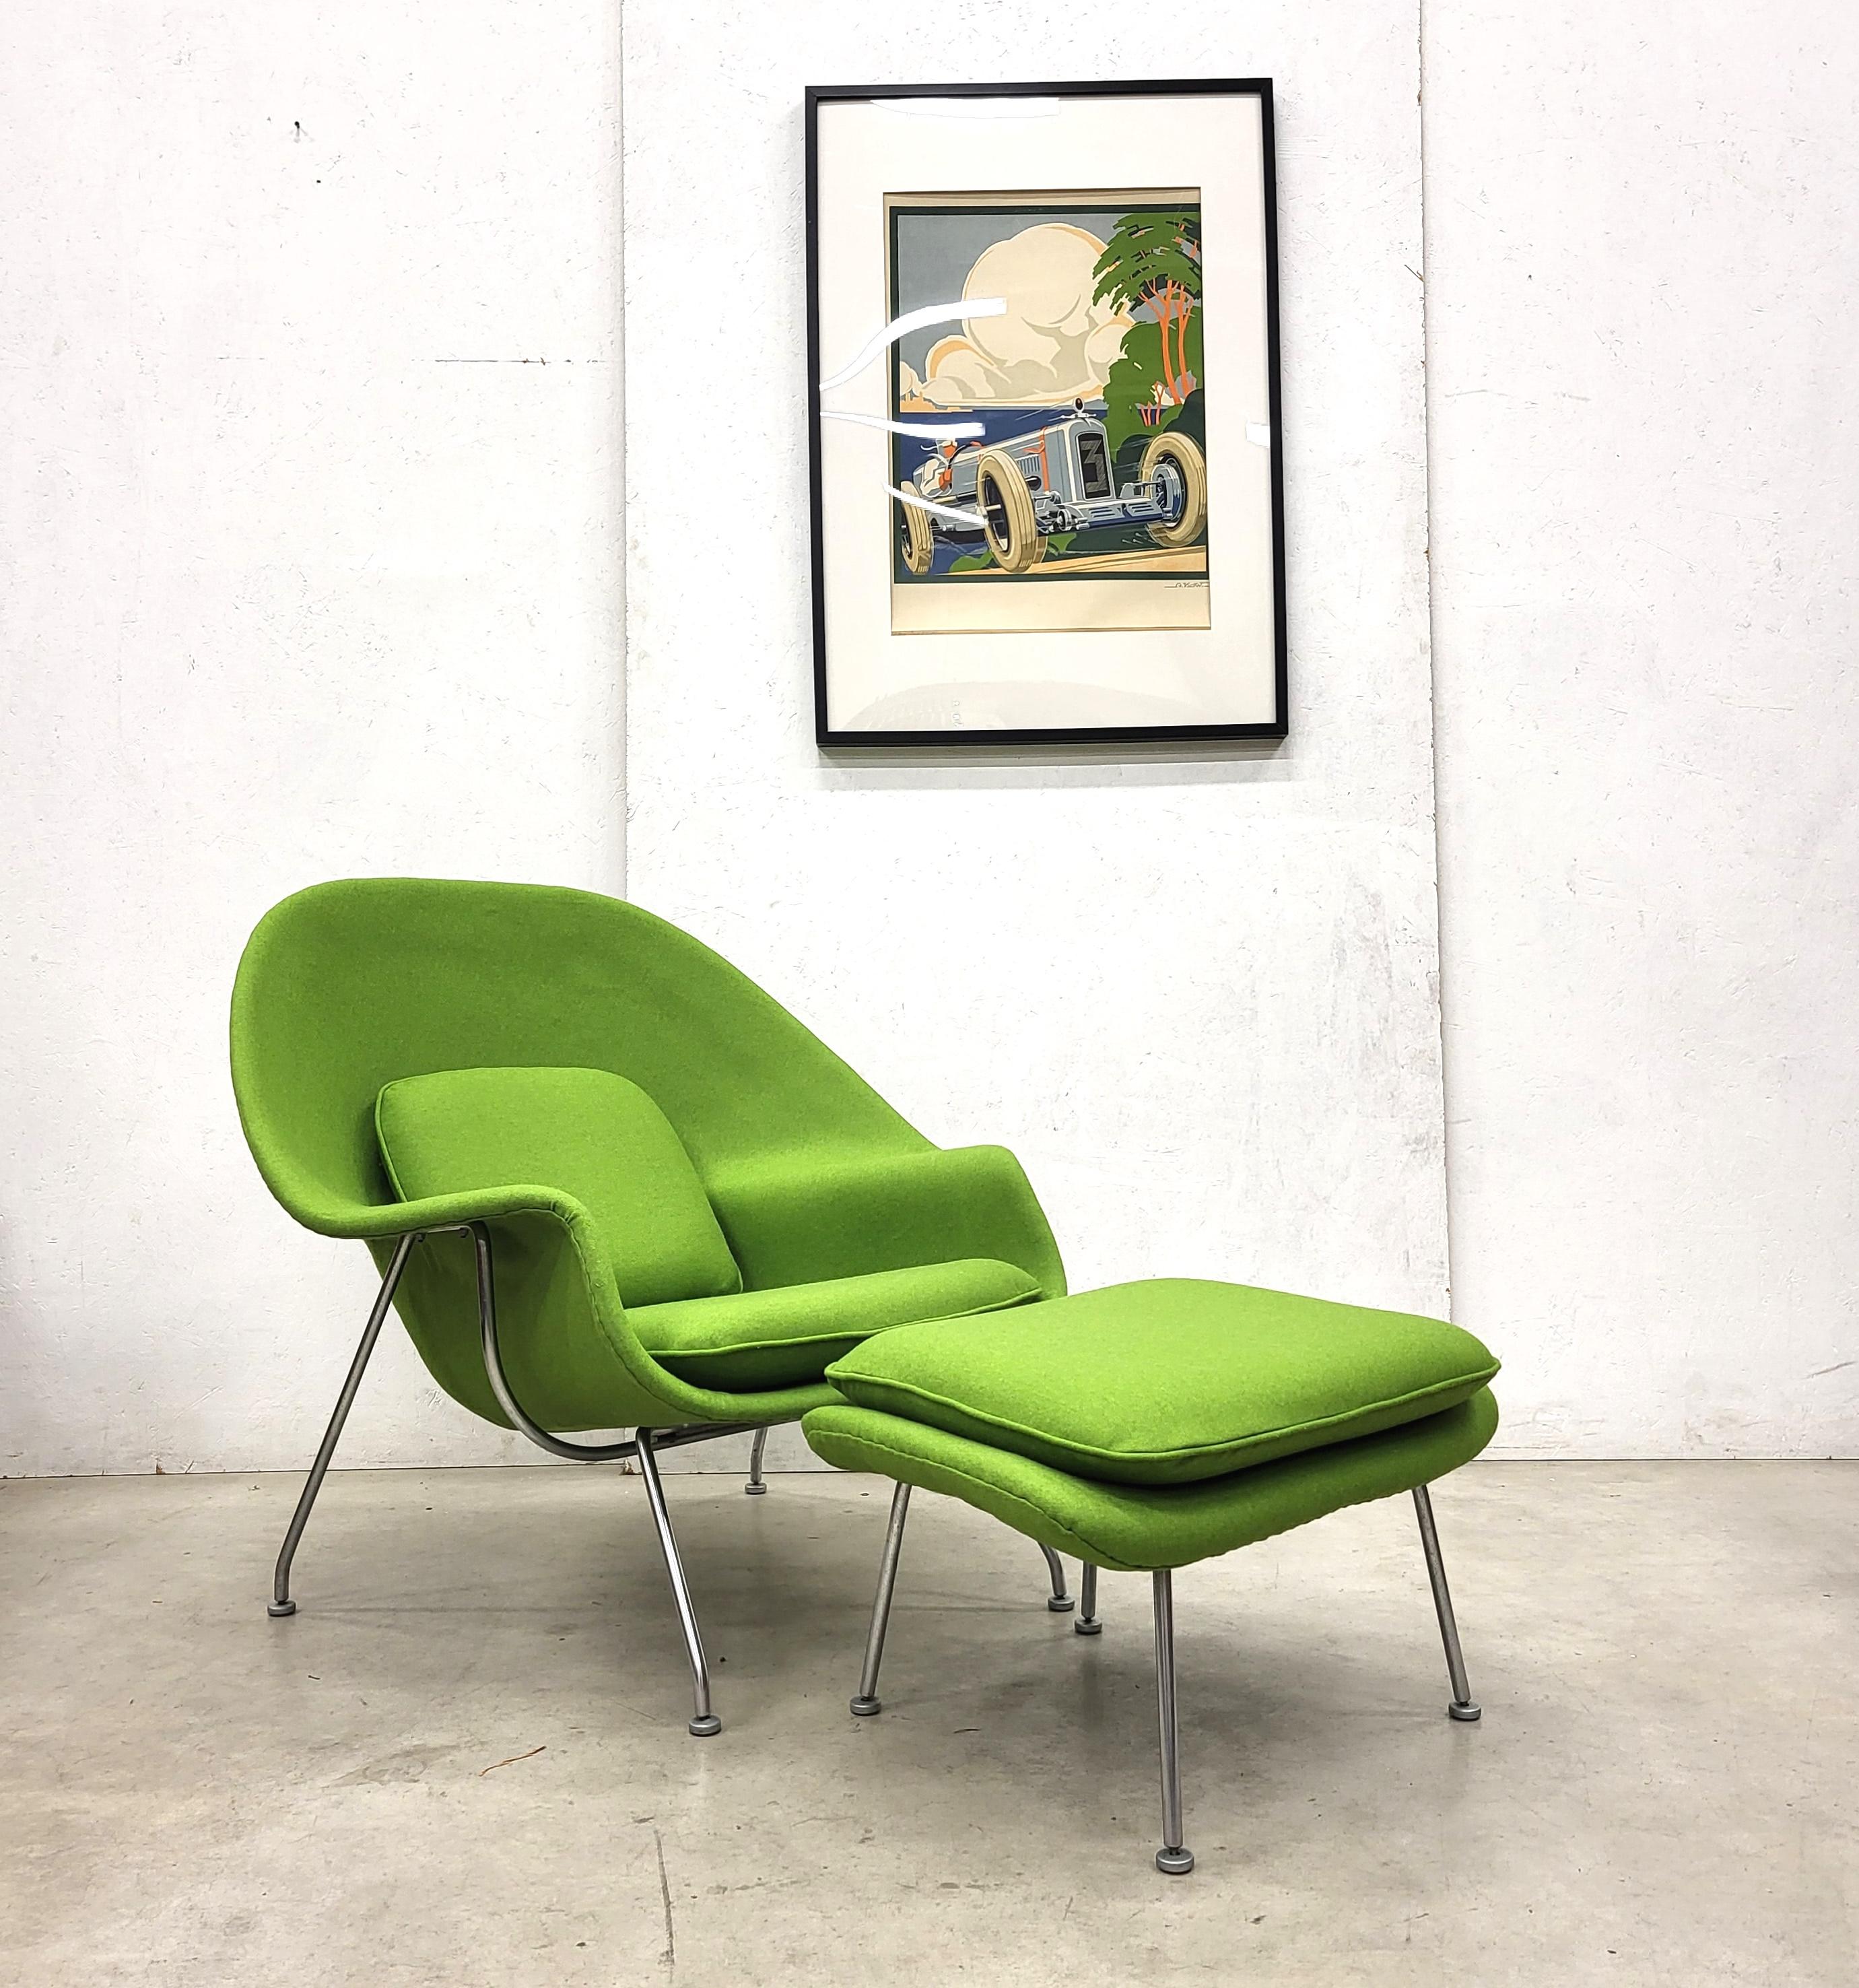 Woodgreen Womb Chair & Ottoman by Eero Saarinen for Knoll, 1960s For Sale 2